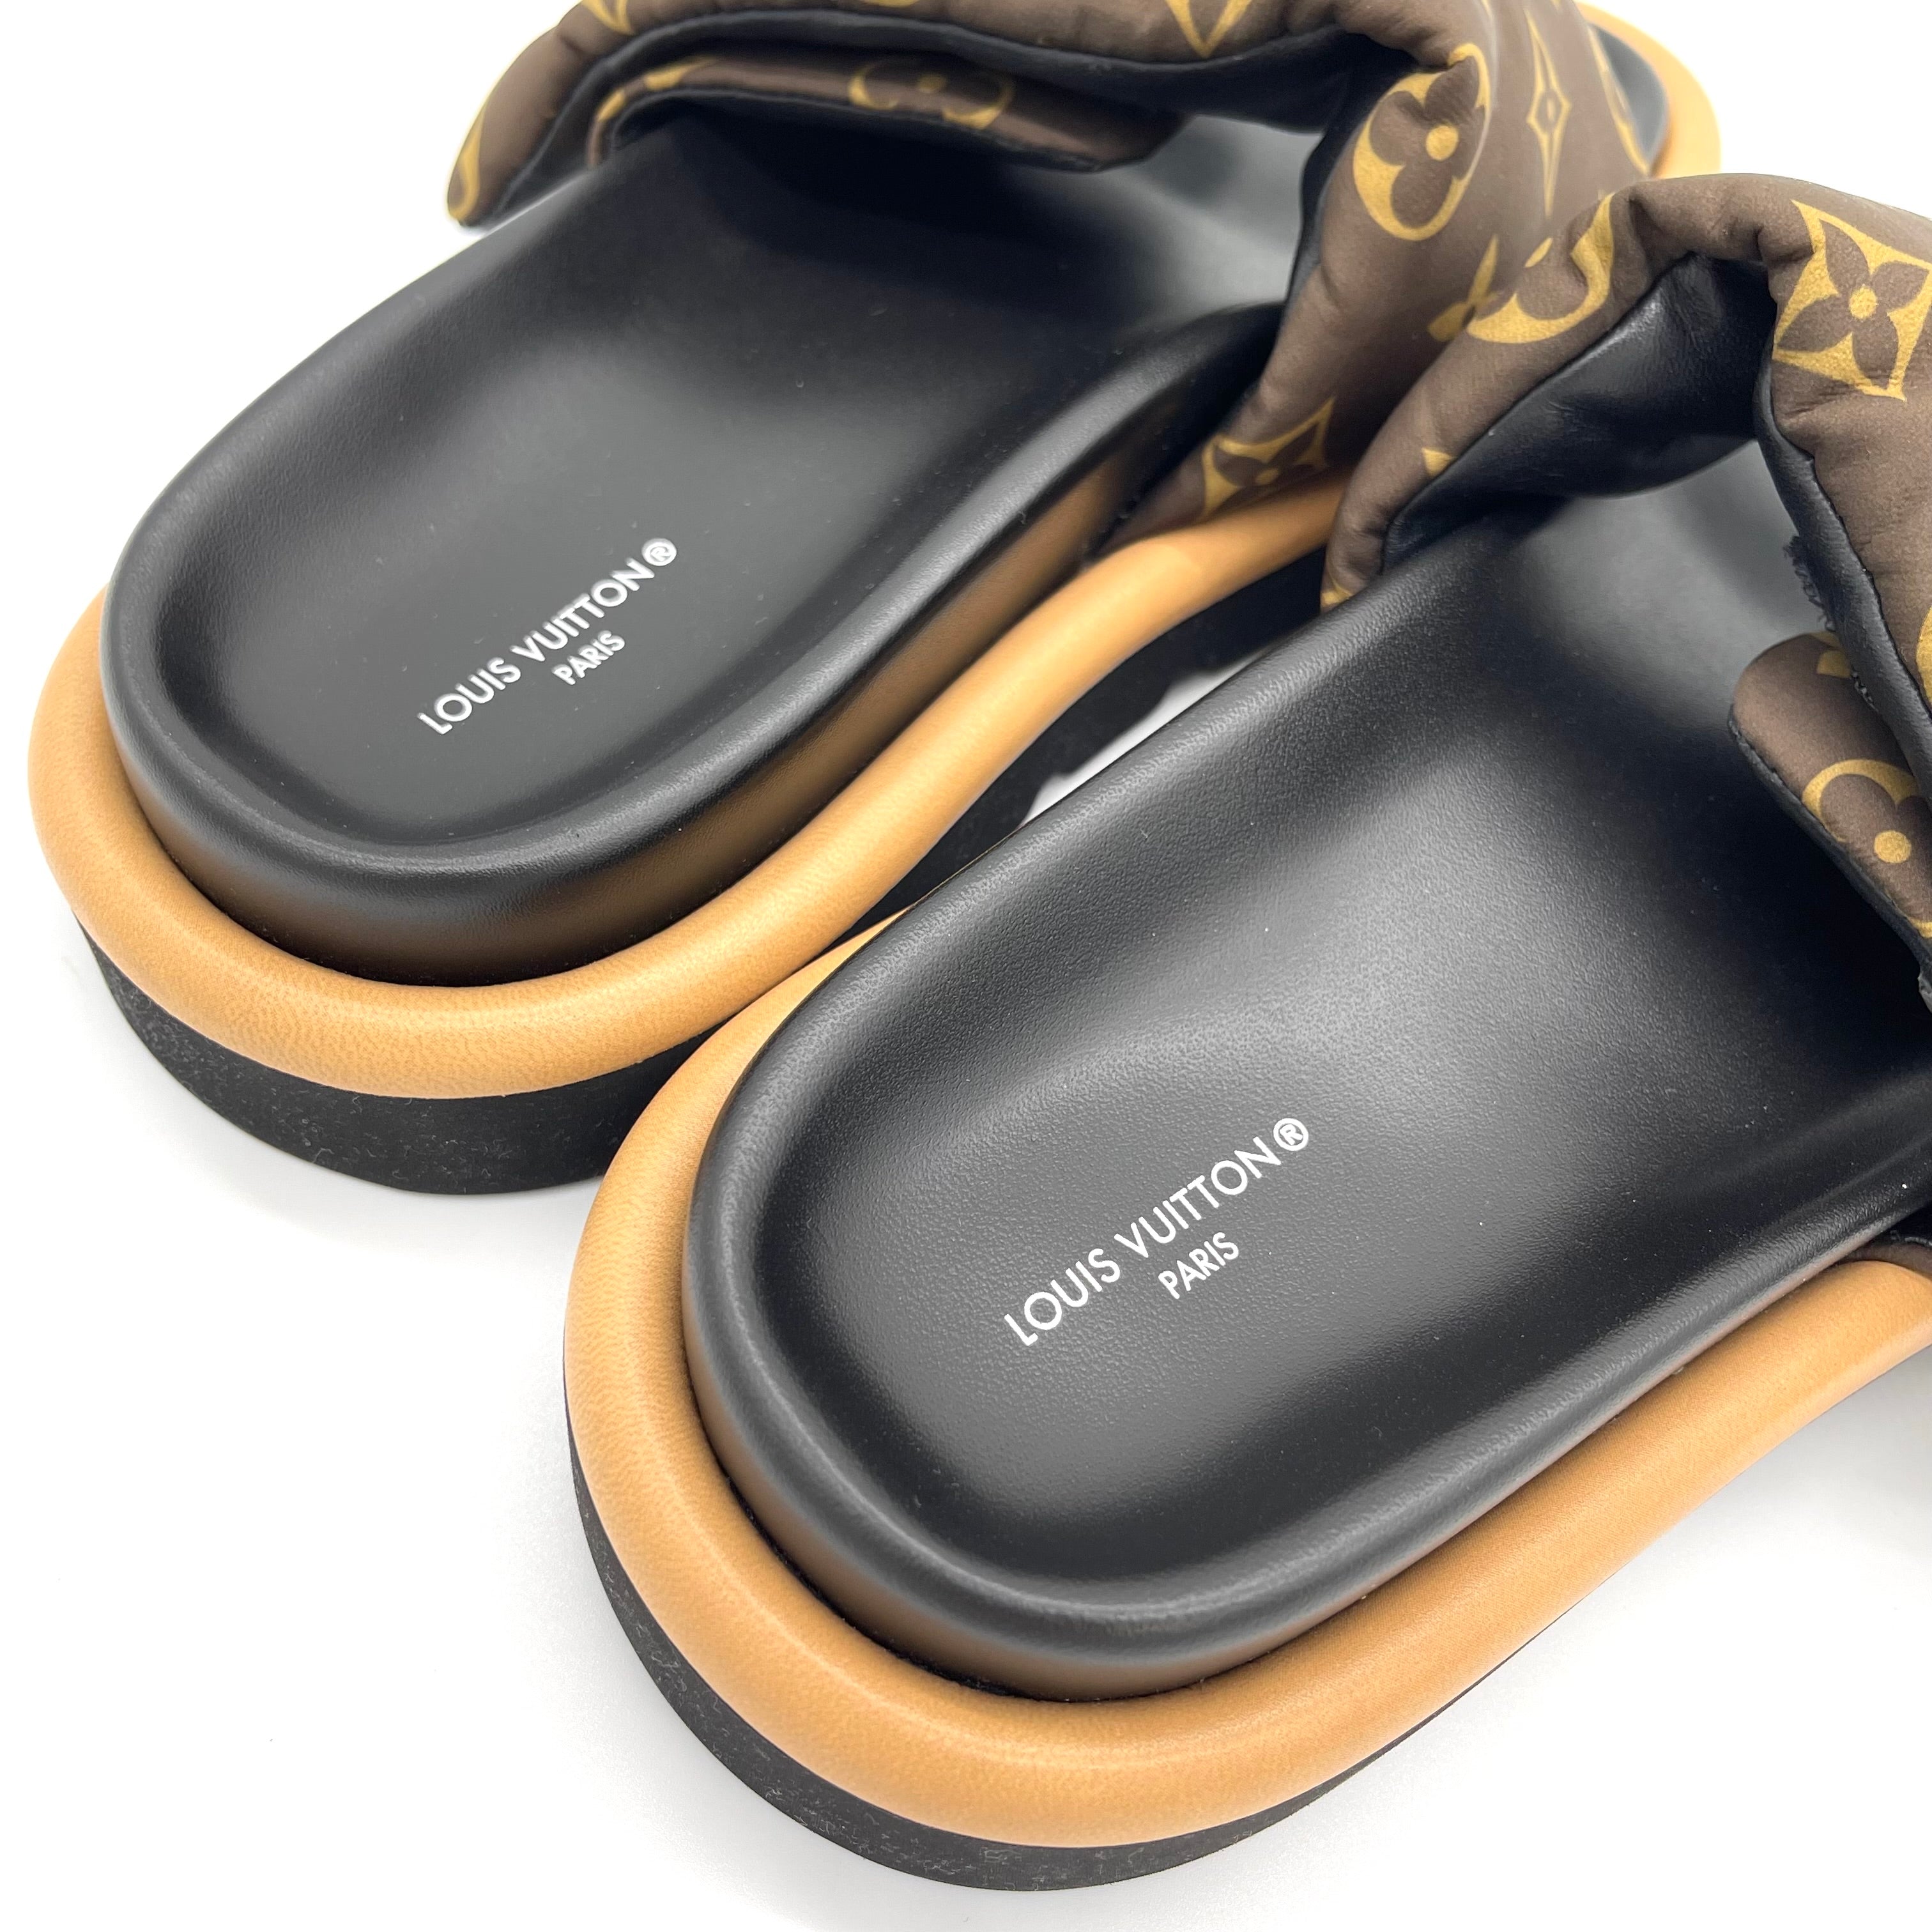 Pool Pillow leather sandals